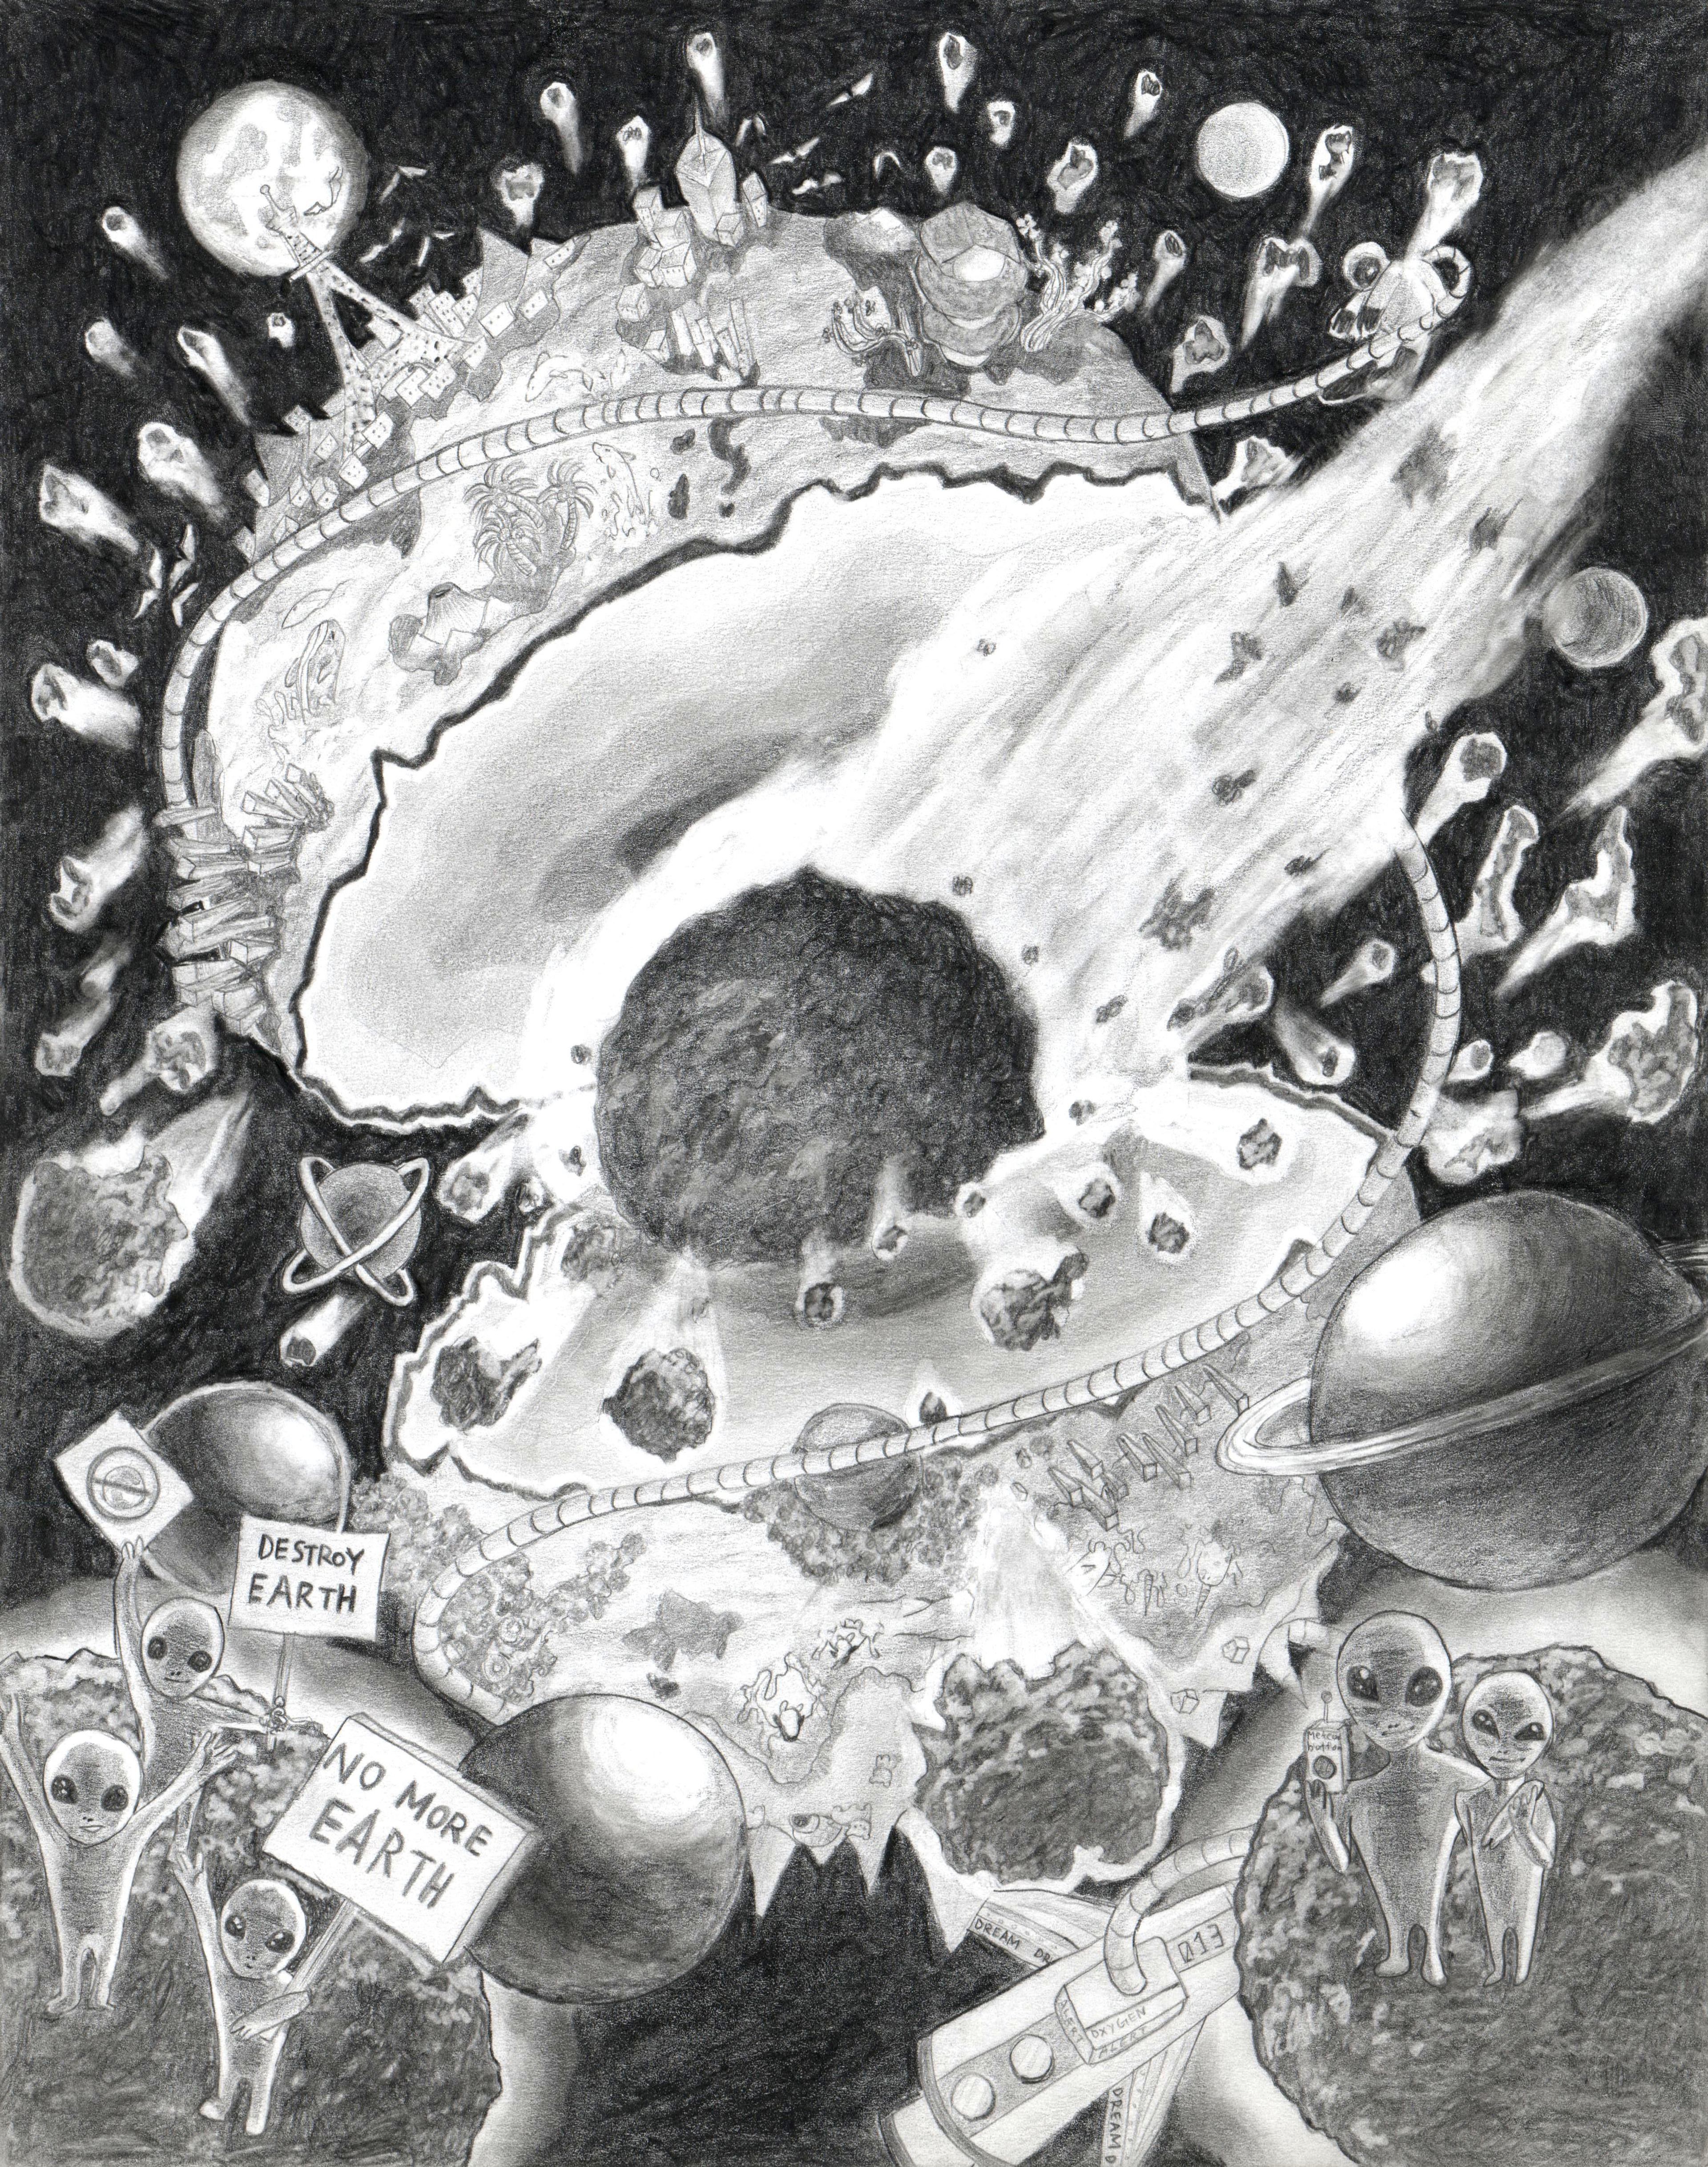 Ebony pencil drawing of the entire planet Earth being split open in the middle like a walnut by a massive fiery meteor that crashes into the center of the Earth's exposed core. Fiery chunks of debris fly away from the planet's surface in all directions. At bottom left, three smiling gray aliens with large eyes stand on a small rocky planetoid and hold up picket signs that say "NO MORE EARTH," "DESTROY EARTH," and a drawing of the Earth with a circle and around it and a line through it. To the bottom right, two aliens stand on another small planetoid. The taller alien holds a device in its right hand, white the smaller alien has both hands crossed upon its chest. A rocket ship floats behind the bottom right planetoid, and a long, snaking, segmented cable winds from the top of the ship across and around the exploding Earth, coming to a stop near the top right corner of the image. A small ringed planet floats in front of the Earth near the bottom right. Two other small planets float to the bottom left.